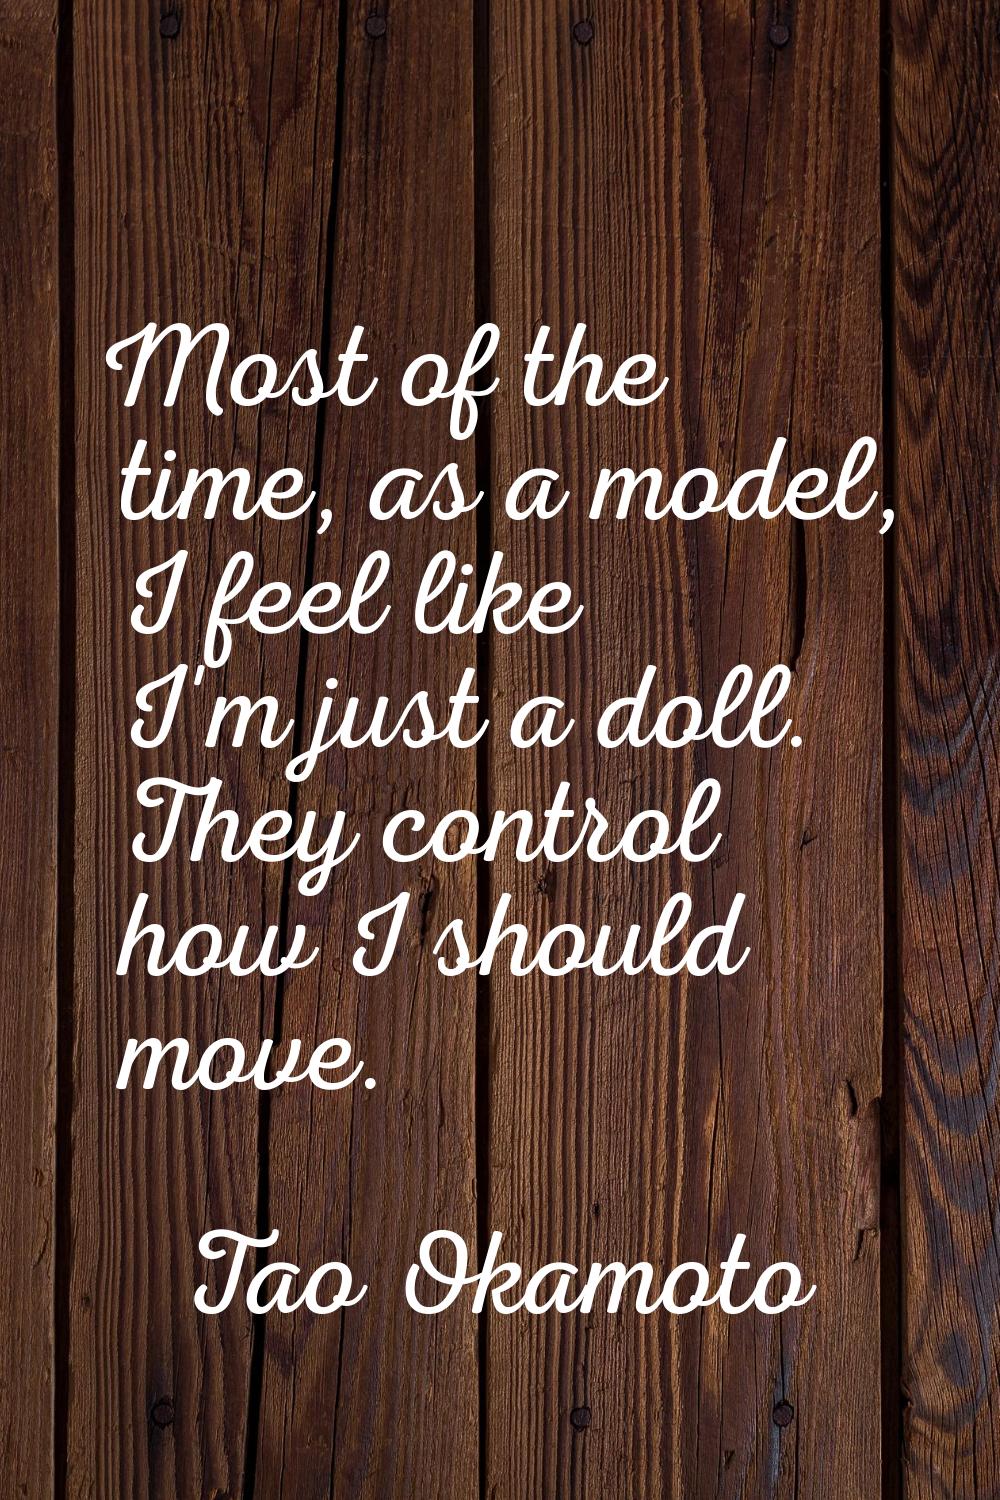 Most of the time, as a model, I feel like I'm just a doll. They control how I should move.